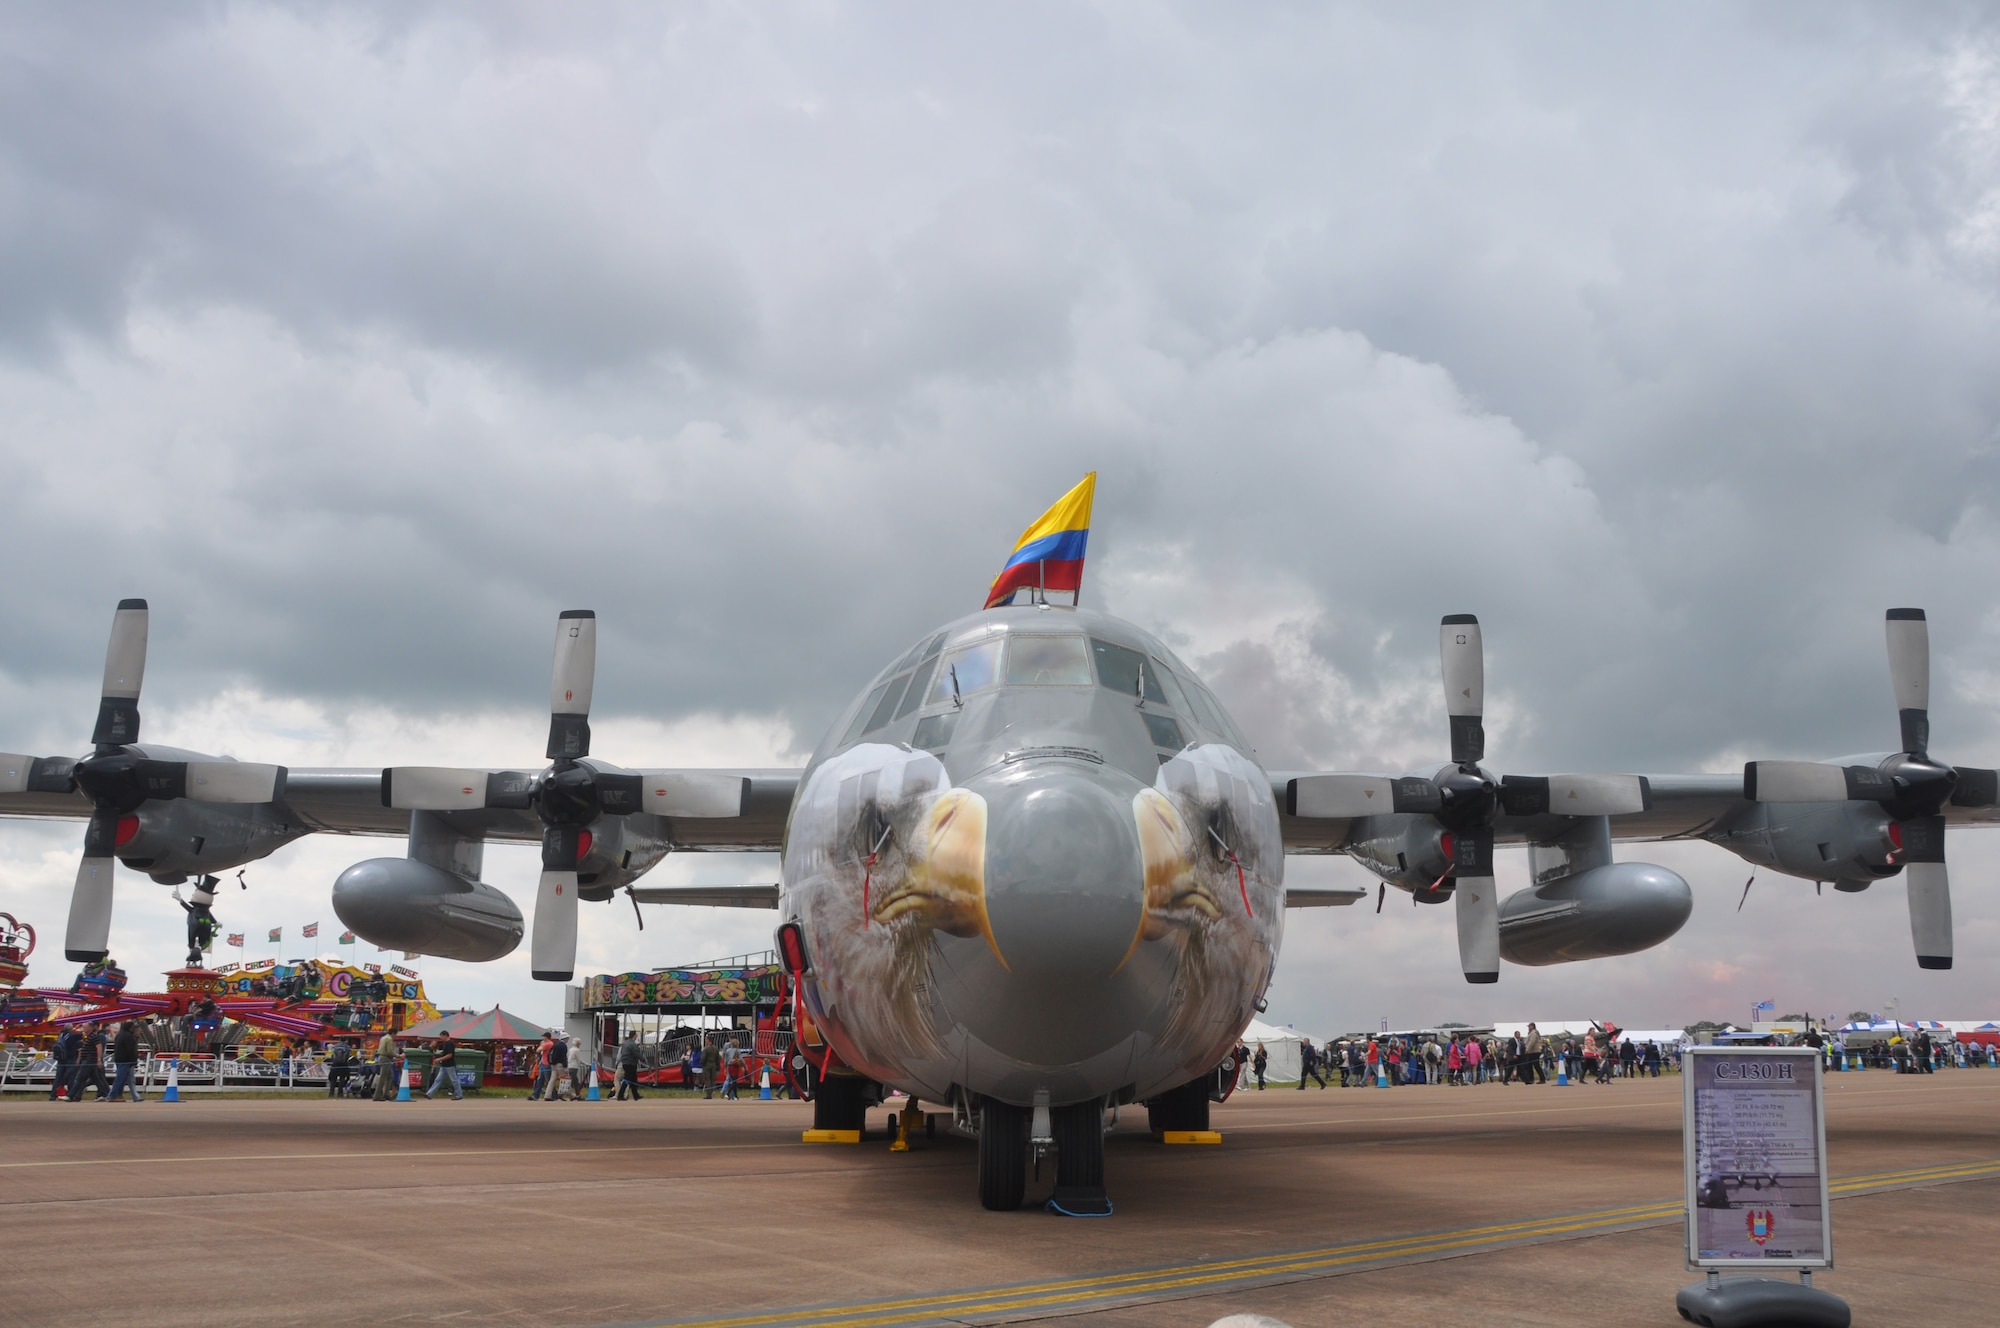 A Columbian C-130H, showcases a colorful paint scheme at the Royal International Air Tattoo held July 7-8 at RAF Fairford, United Kingdom. The aircraft is one 268 aircraft on display at the largest military air show in the world. (U.S. Air Force photo/Master Sgt. Donna T, Jeffries) 